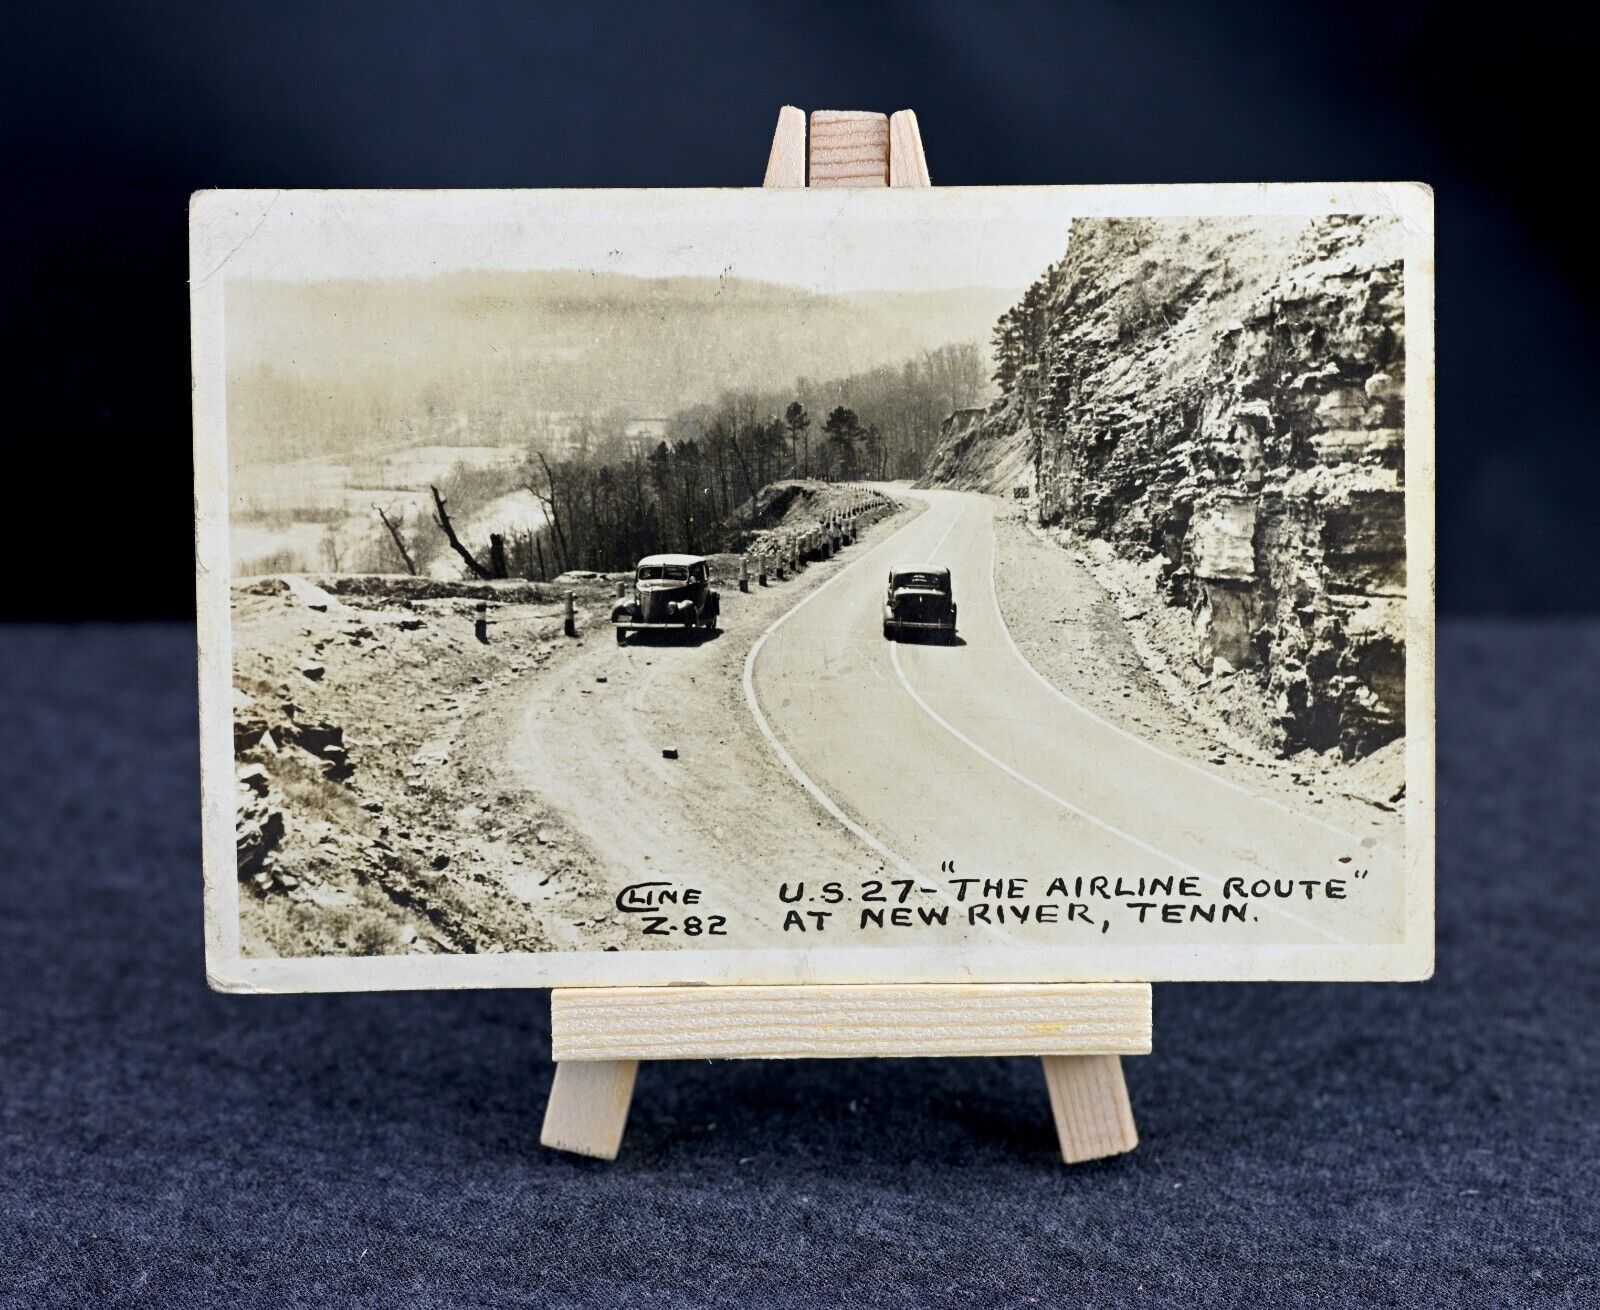 New River, TN - US 27 The Airline Route - RPPC Cline Real Photo Postcard